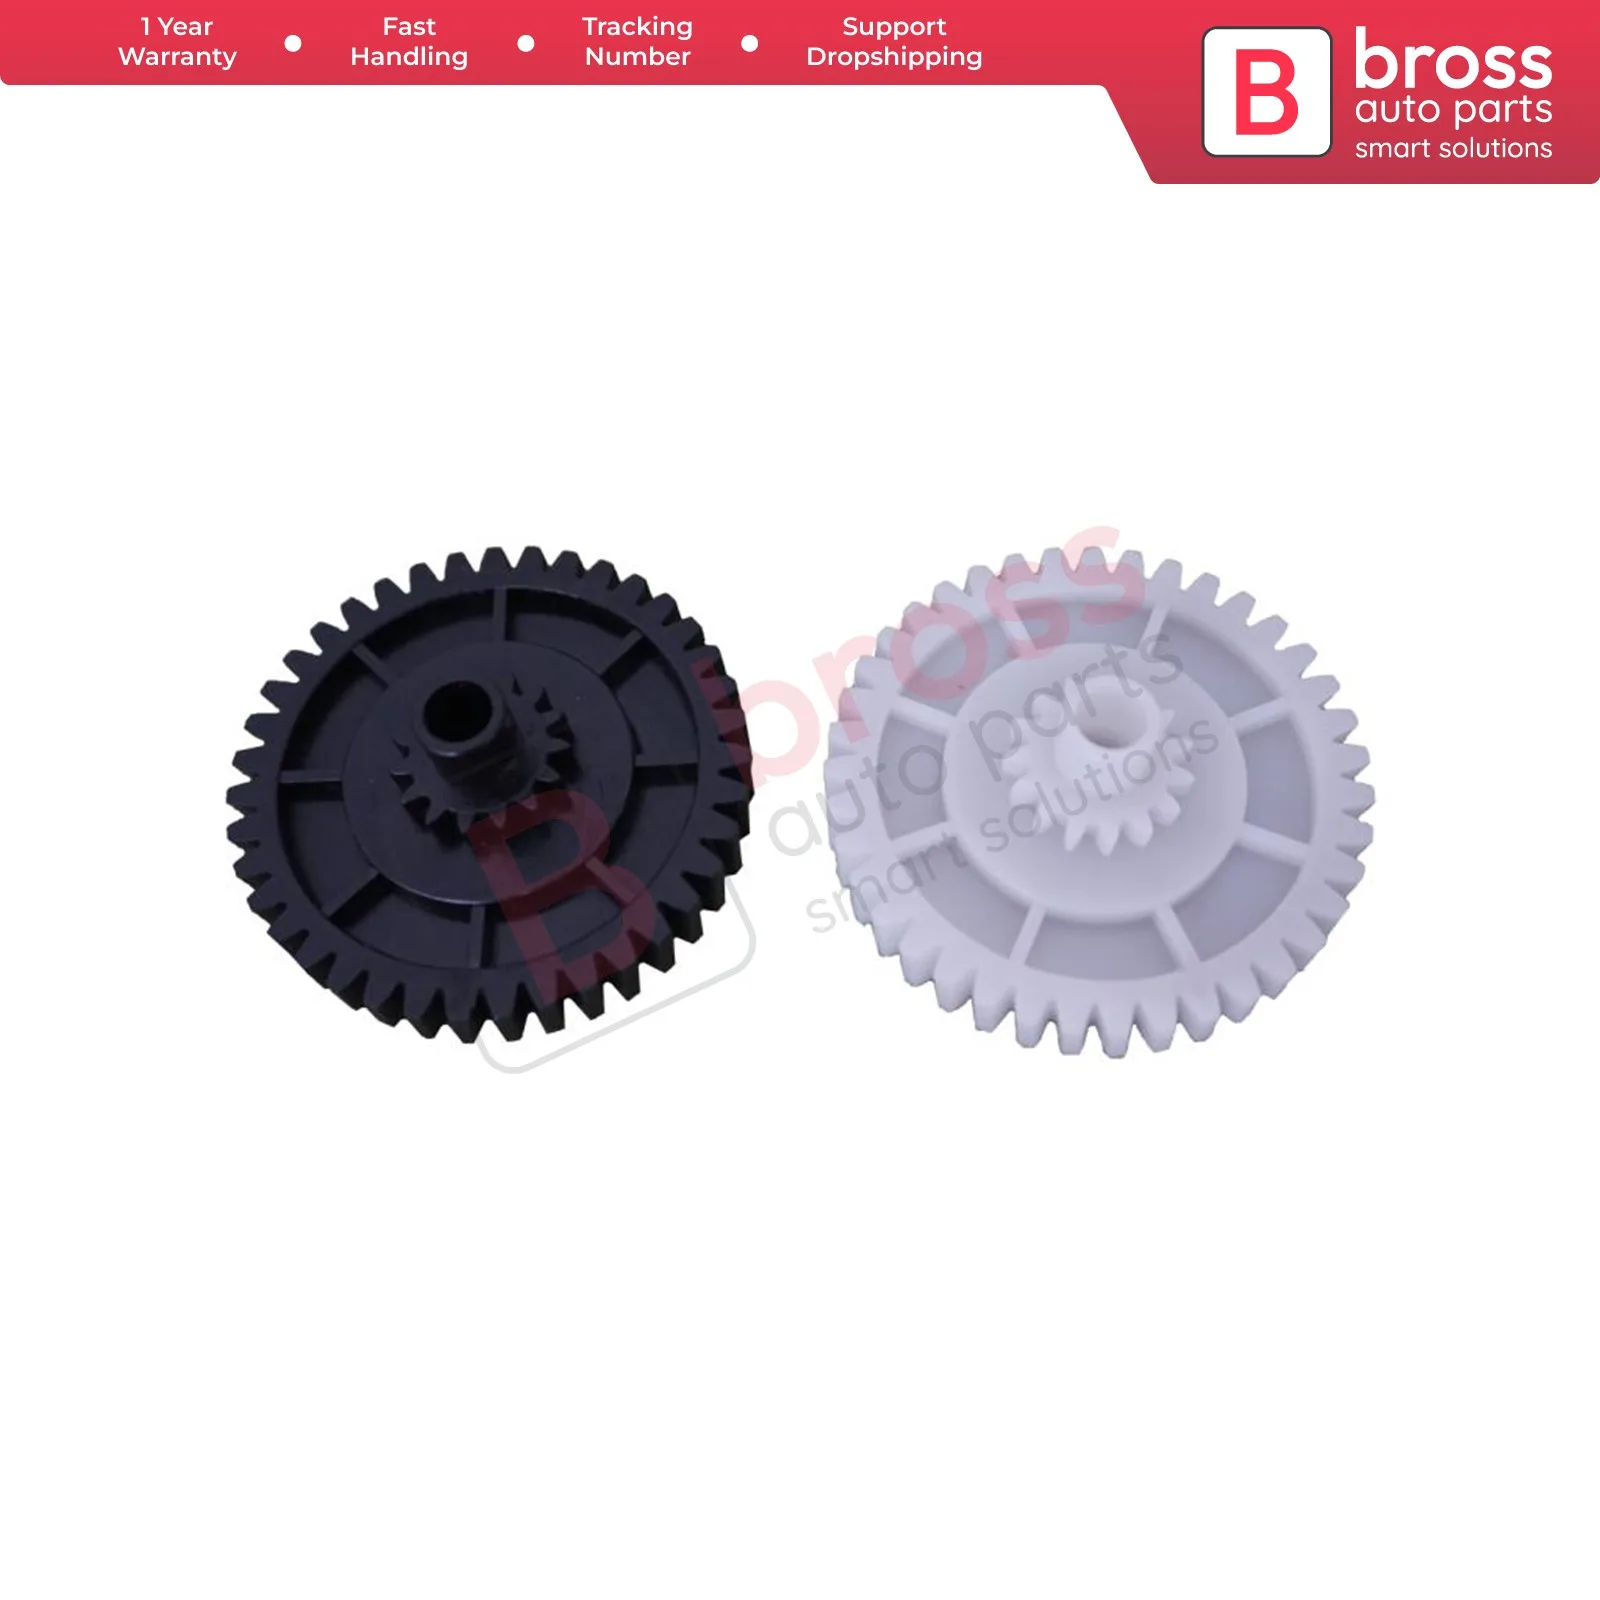 

Bross Auto Parts BGE581 Top transmission Repair Gears 98756118001 Left and Right Side for Porsche Boxster Convertible 1997-2012